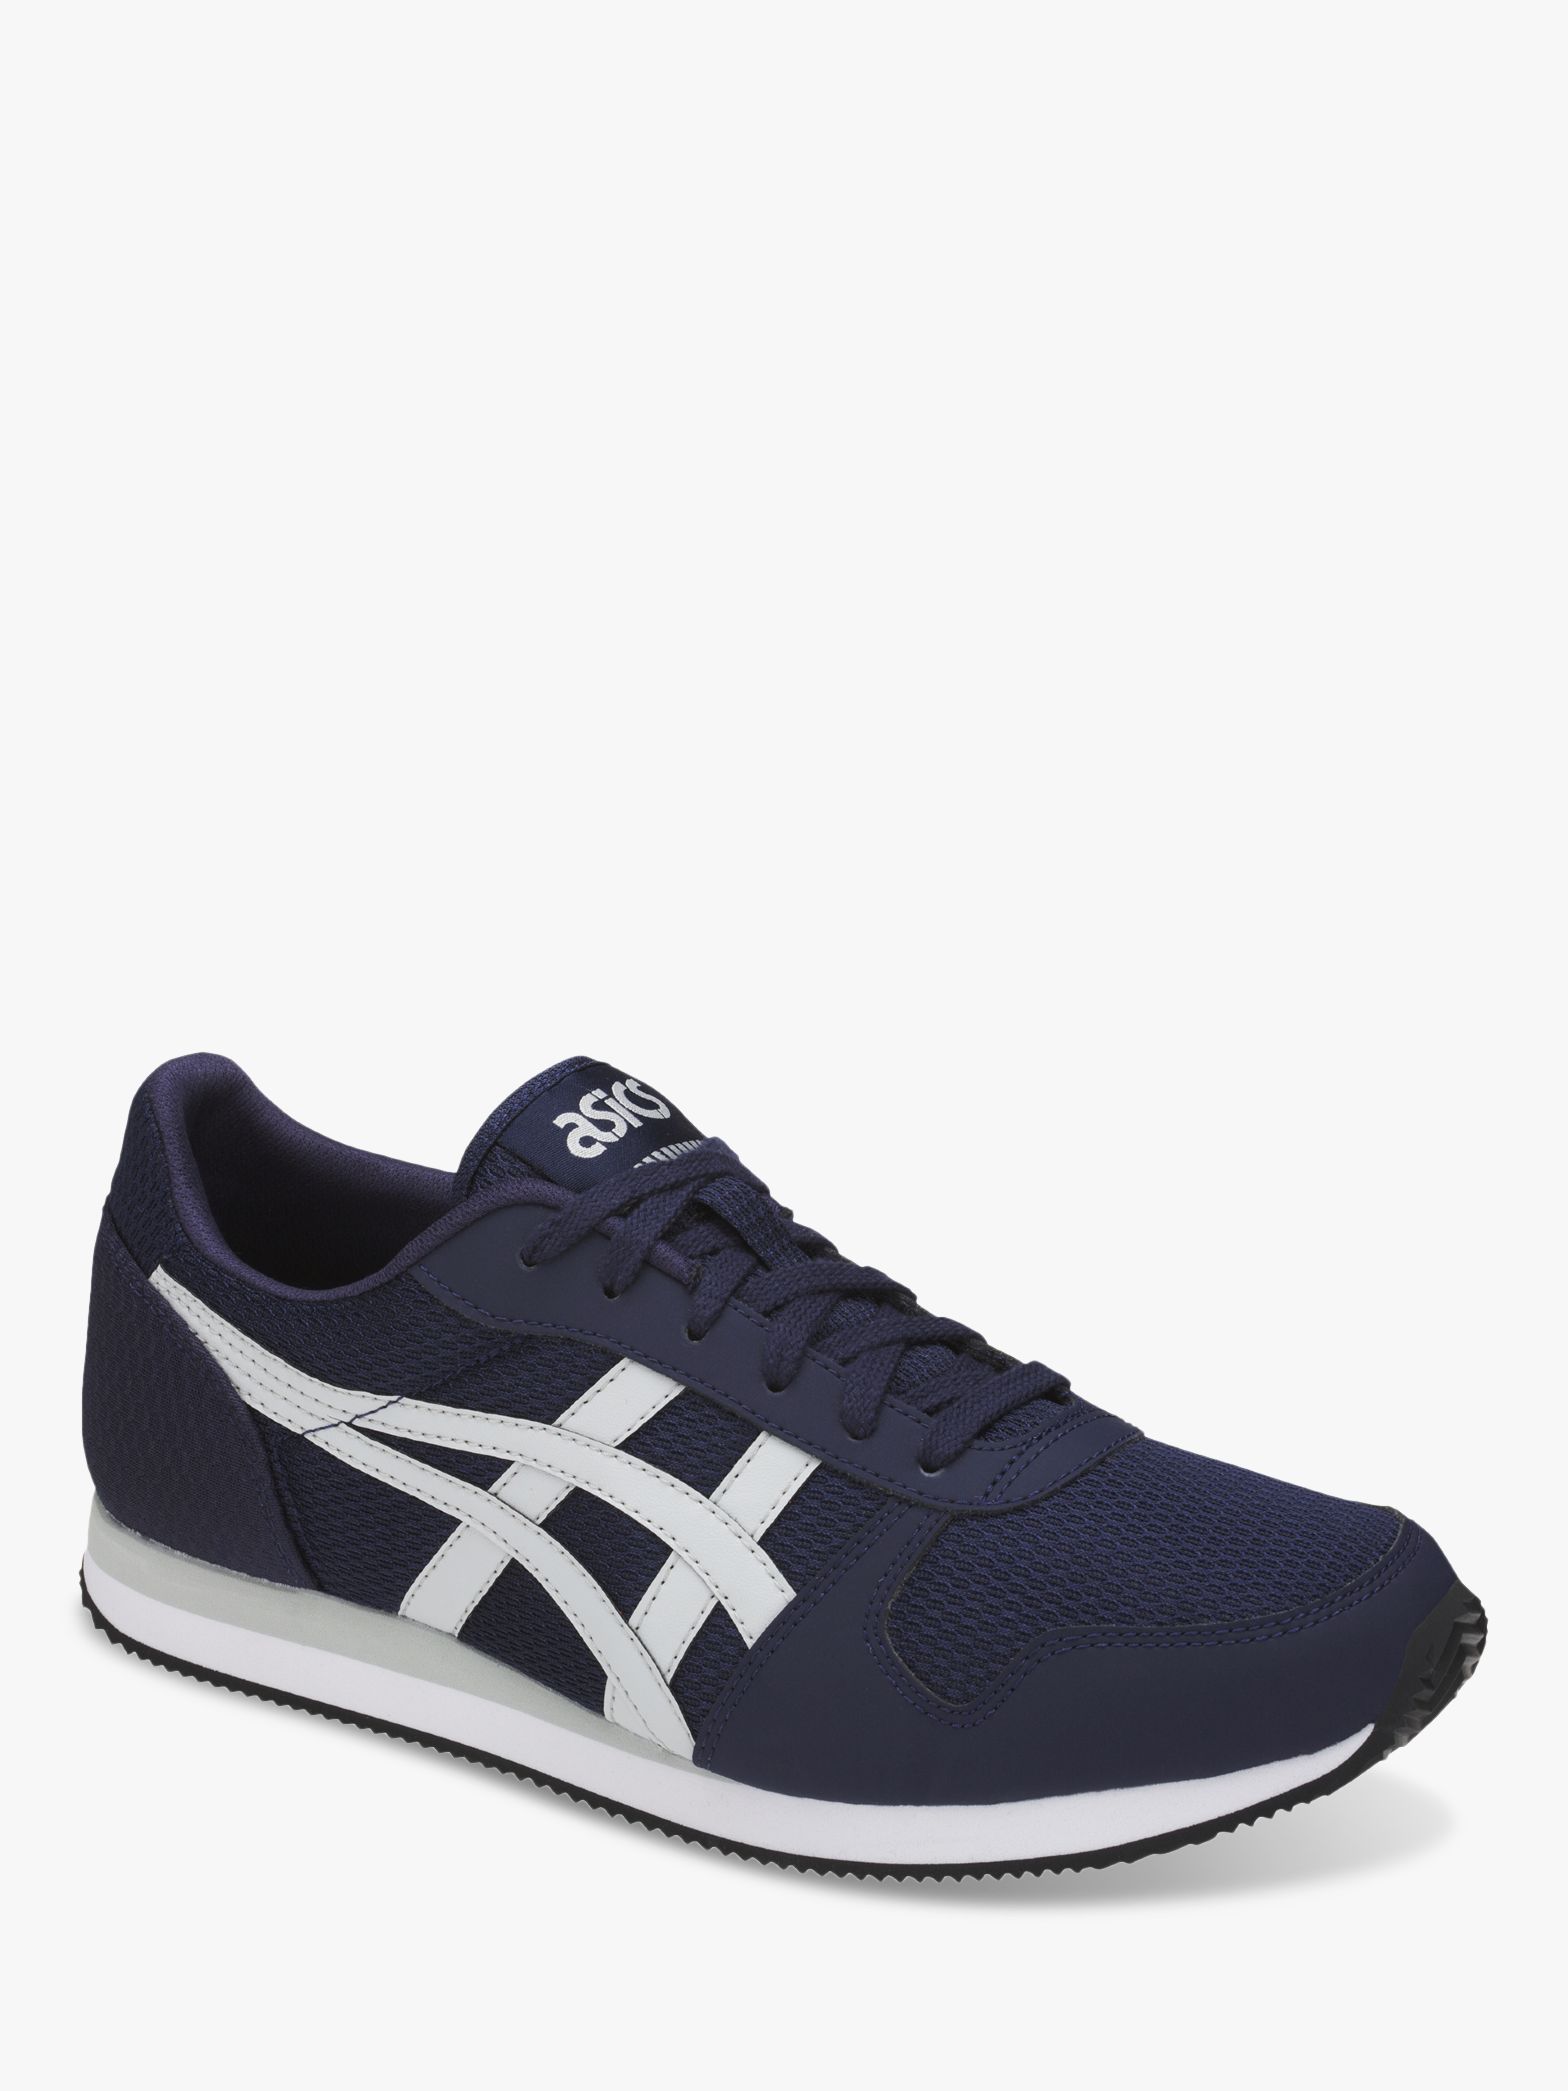 asics tiger mens curreo ii trainers